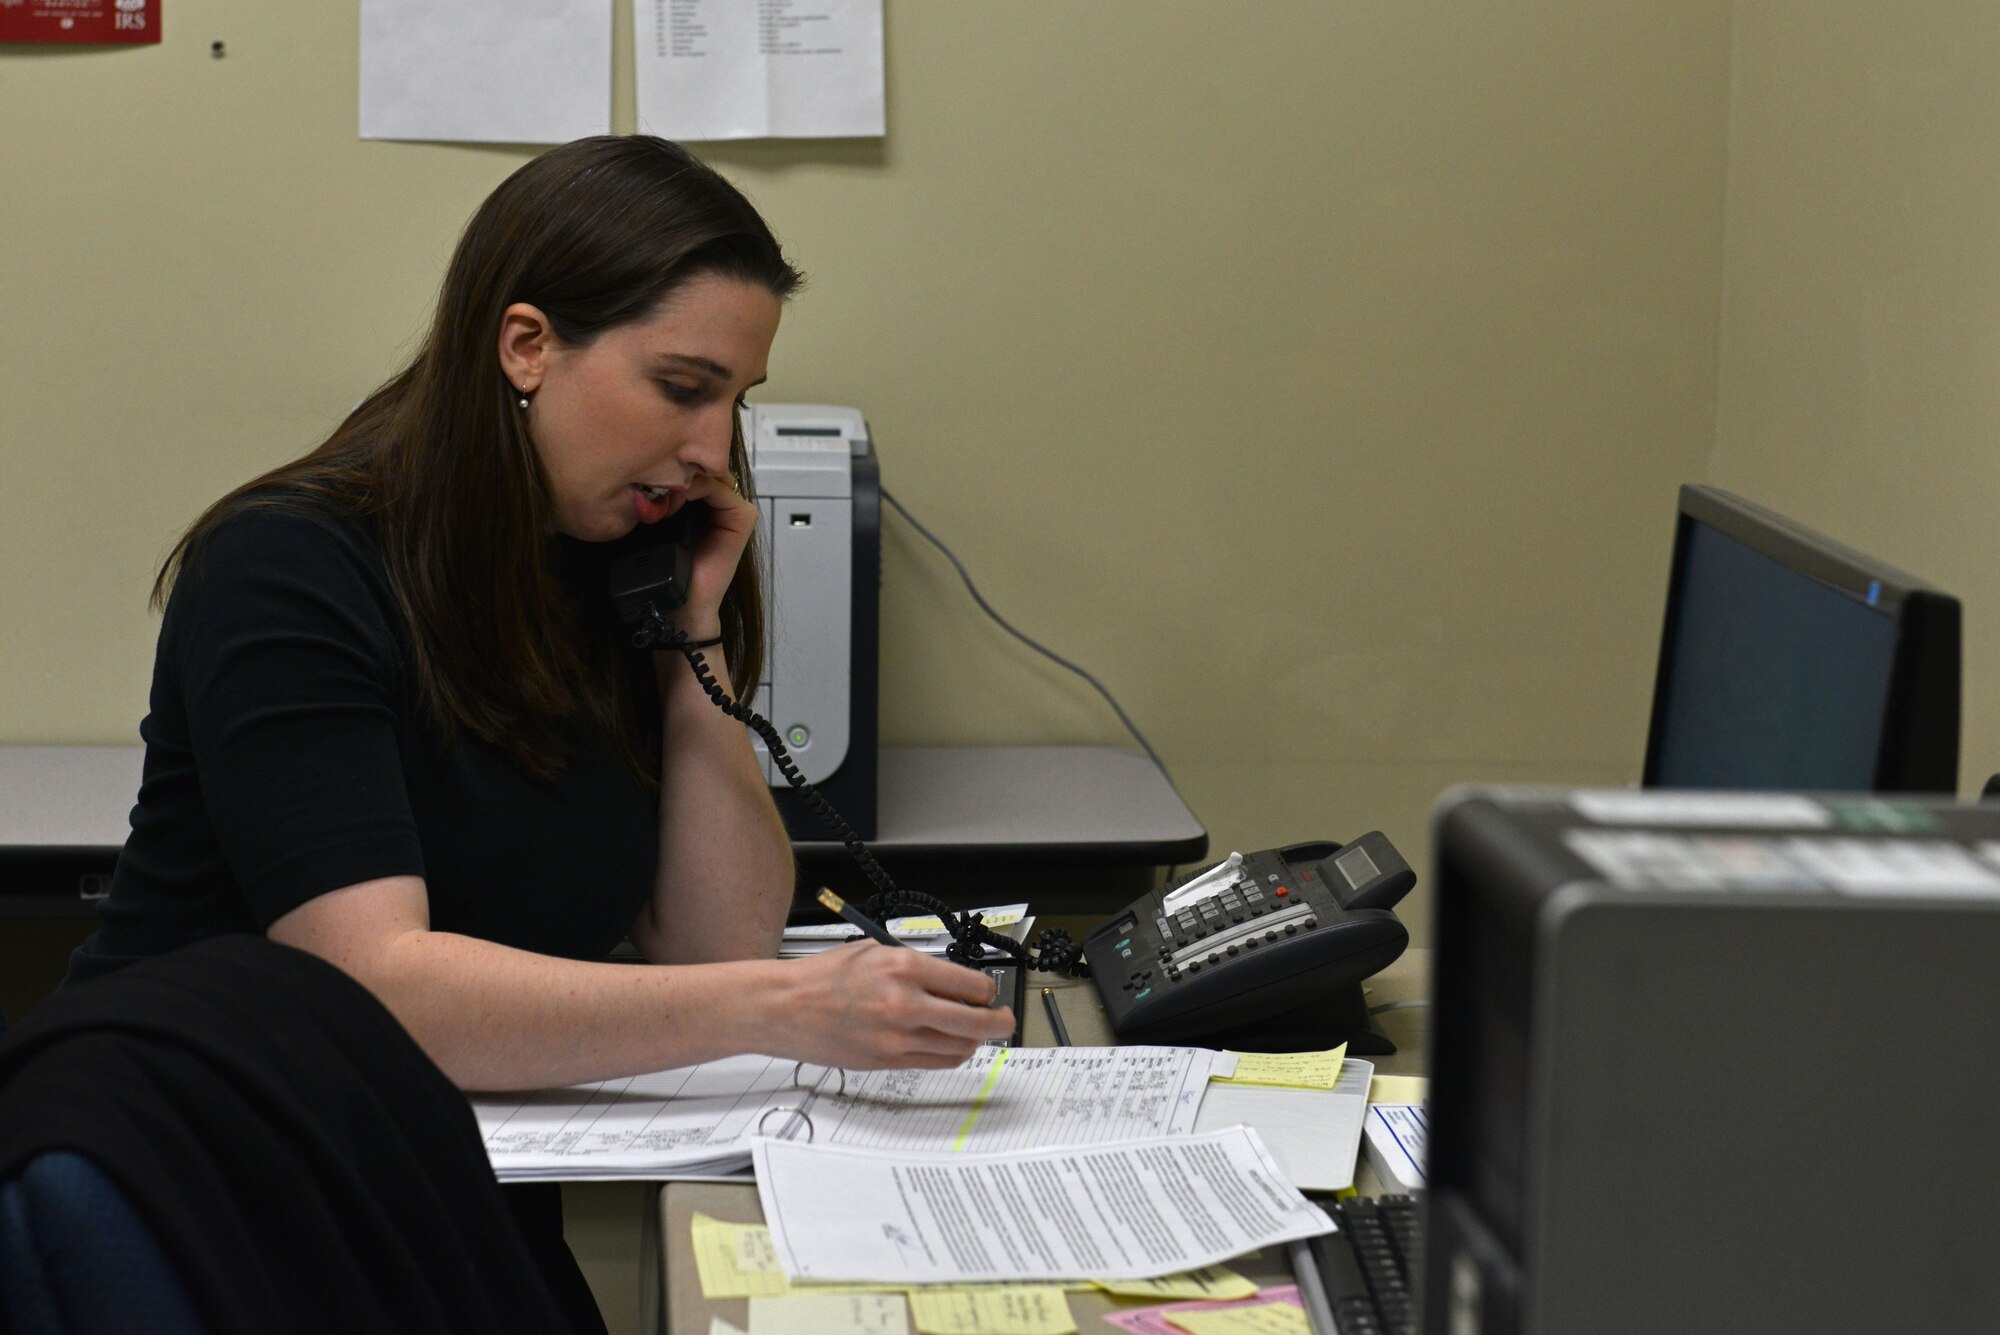 Marie Davis, tax center volunteer, schedules an appointment over the phone at Shaw Air Force Base, S.C., Feb. 6, 2017. The tax center offers appointments Monday through Thursday and accepts walk-ins with a 1040 EZ form on Fridays. (U.S. Air Force photo by Airman 1st Class Destinee Sweeney)